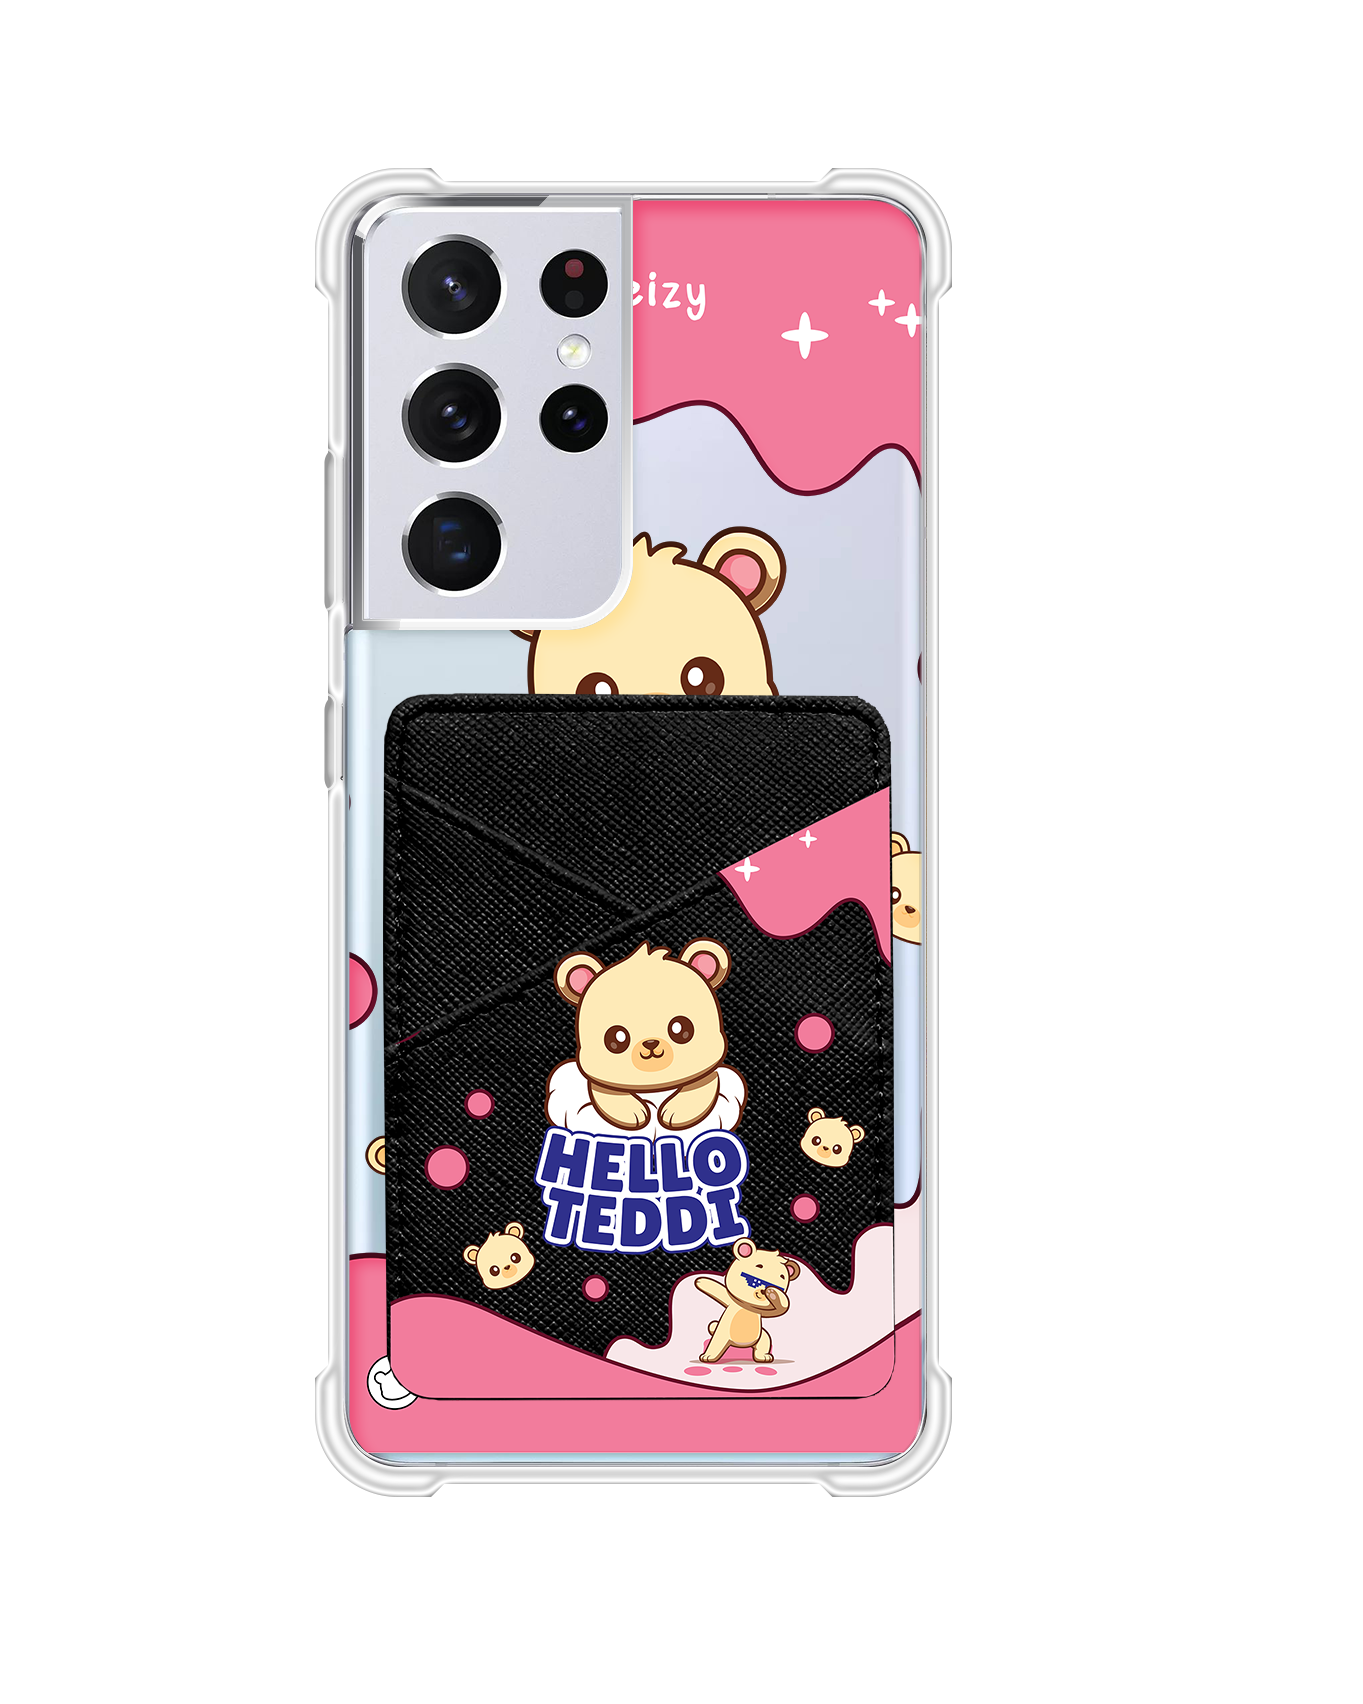 Android Phone Wallet Case - Hello Teddy 2.0